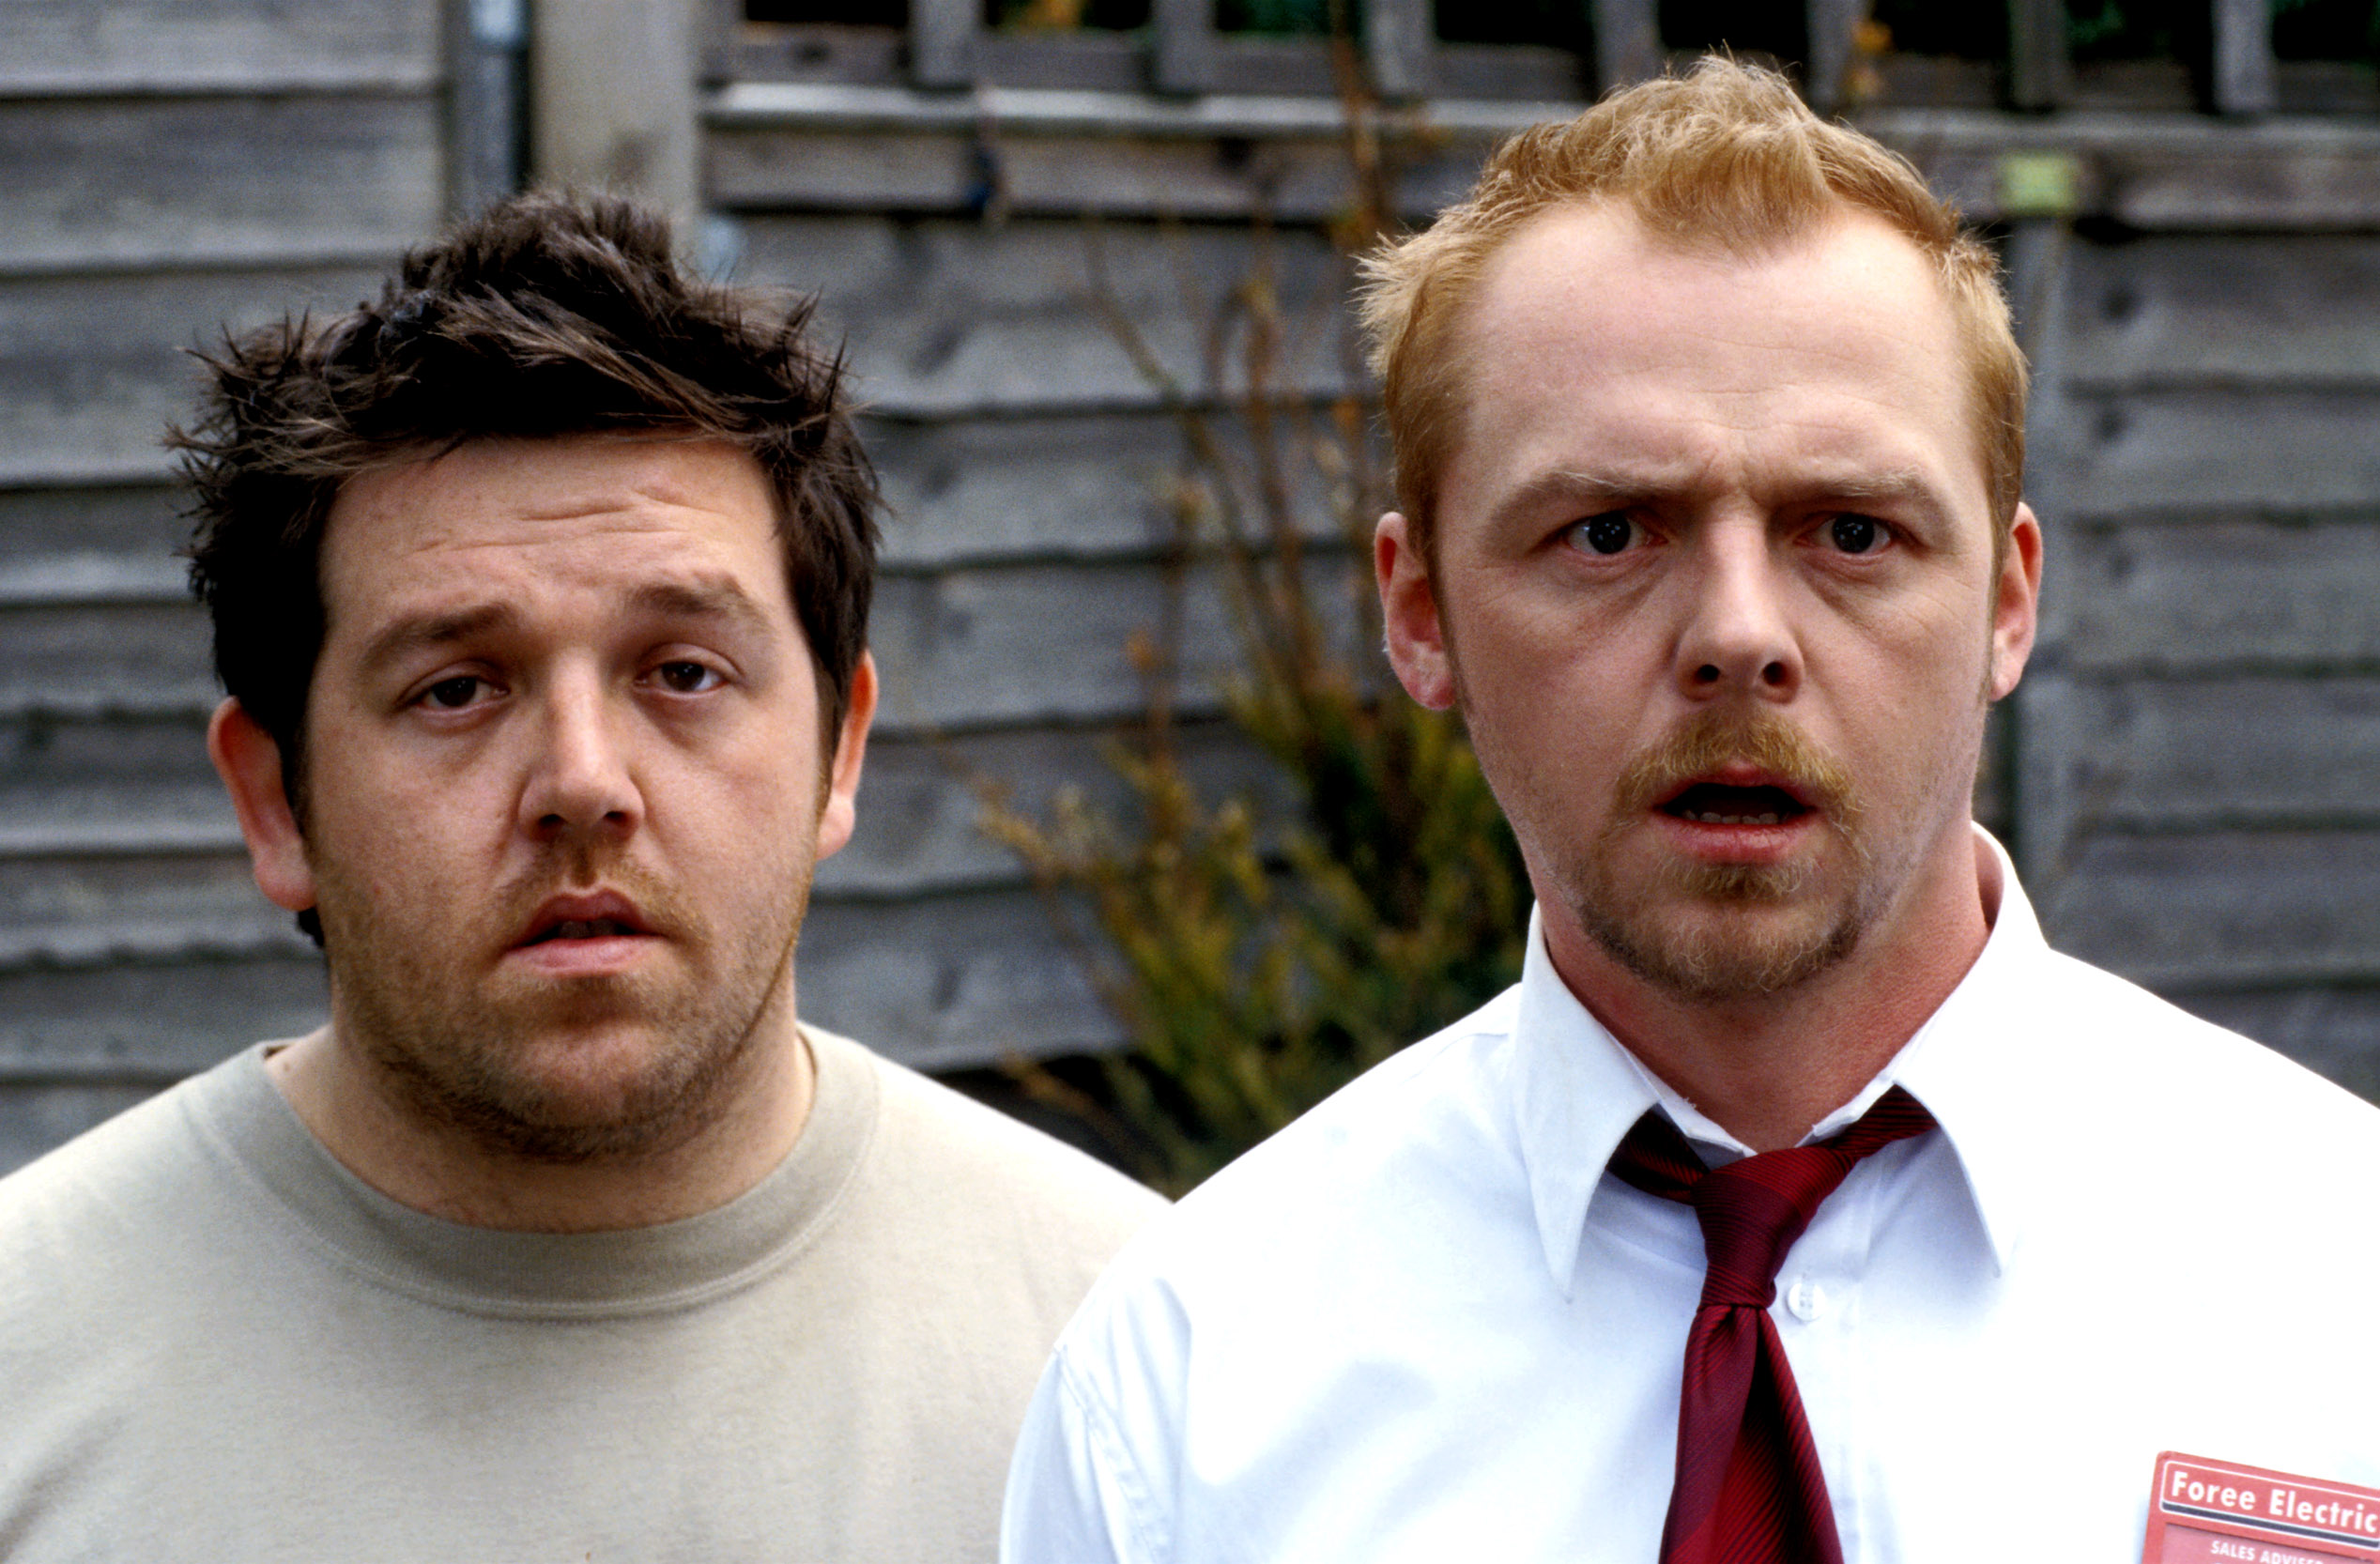 SHAUN OF THE DEAD, Nick Frost, Simon Pegg, 2004, (c) Rogue Pictures/courtesy Everett Collection